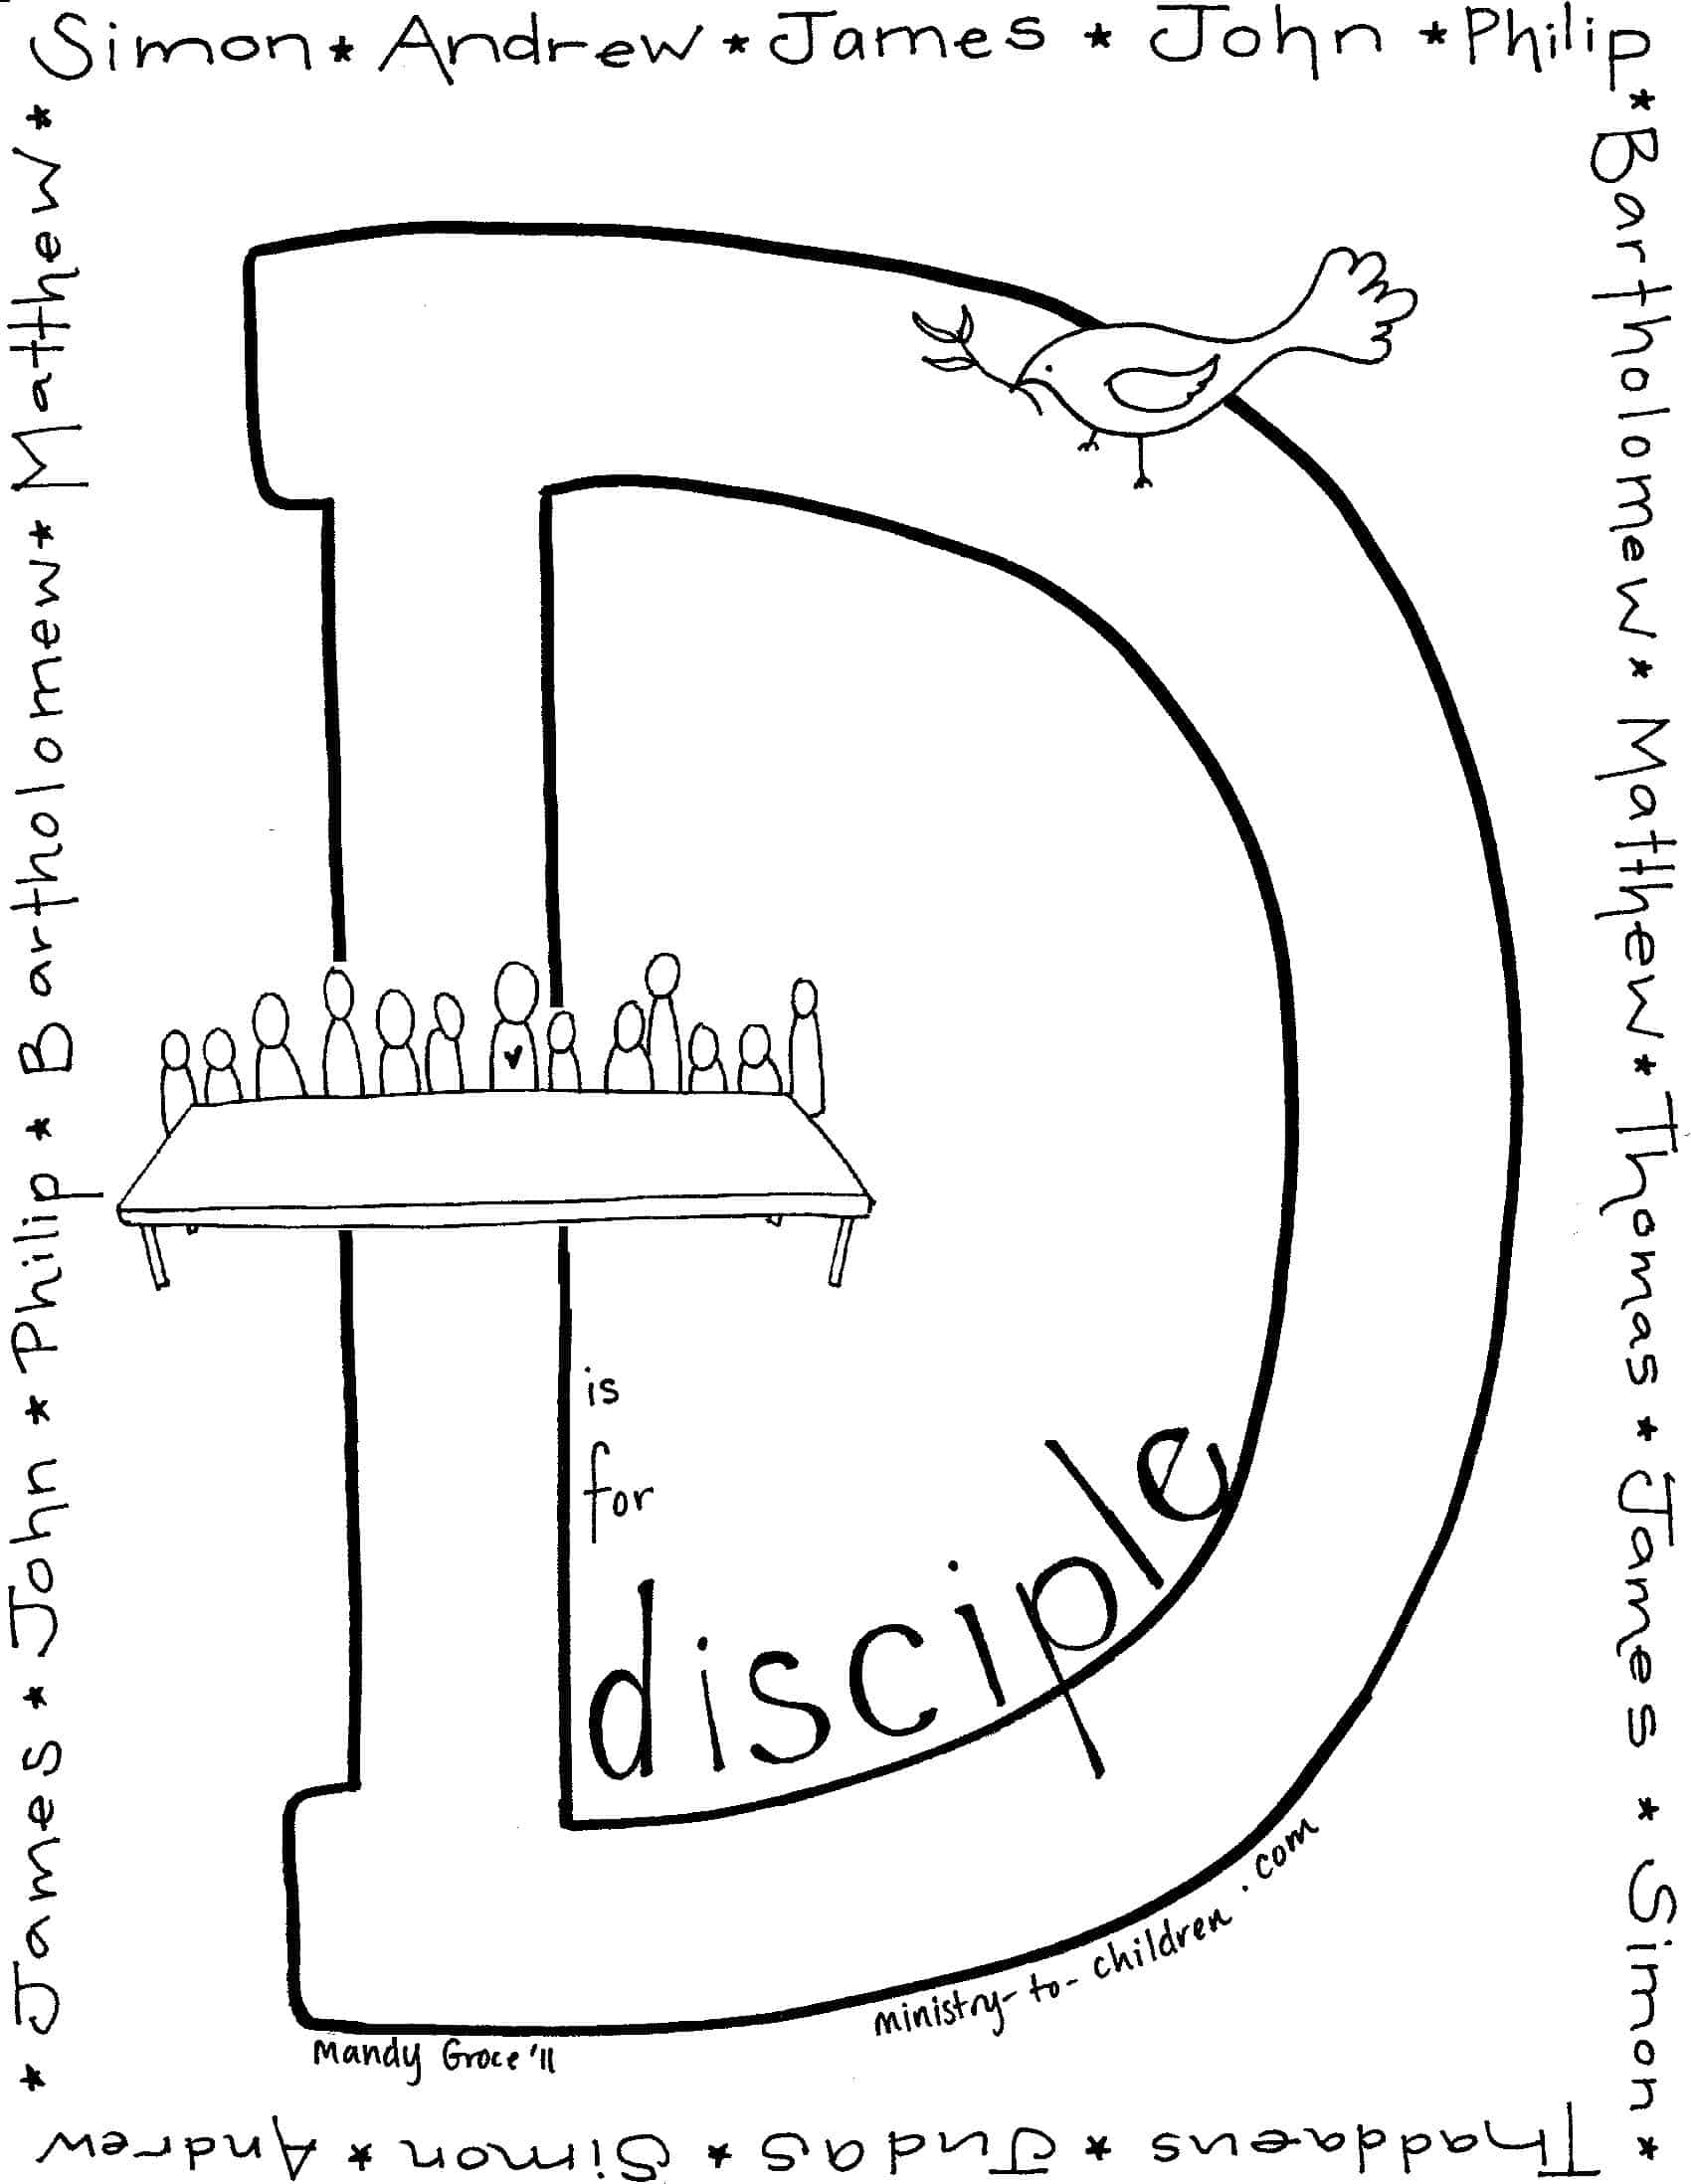 d is for disciple coloring page